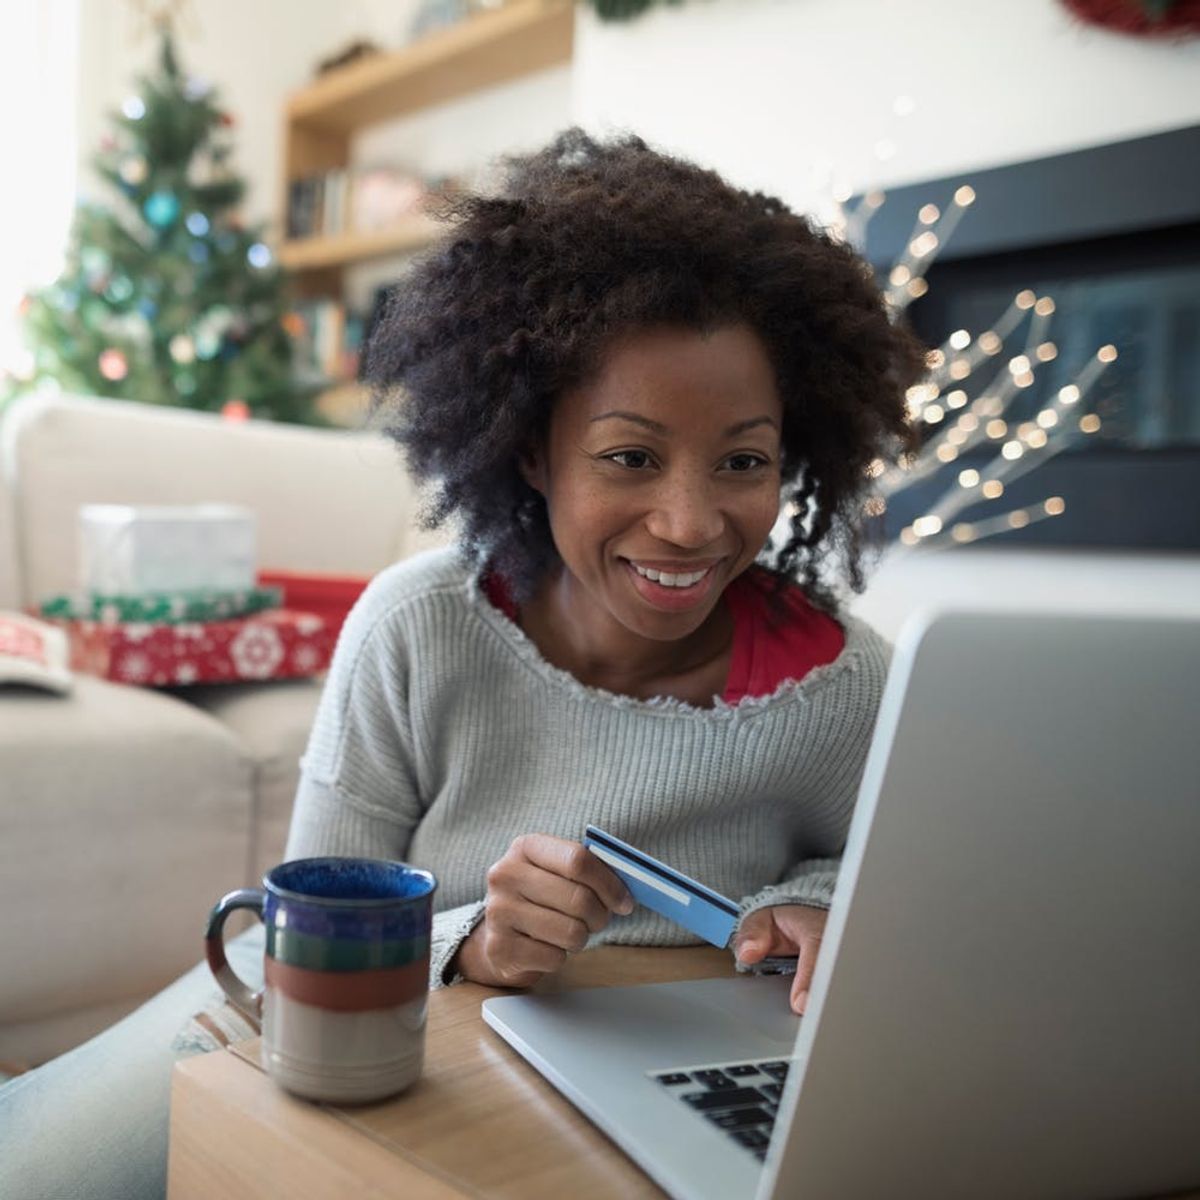 7 Smart Shopping Hacks to Save You Money During the Holidays